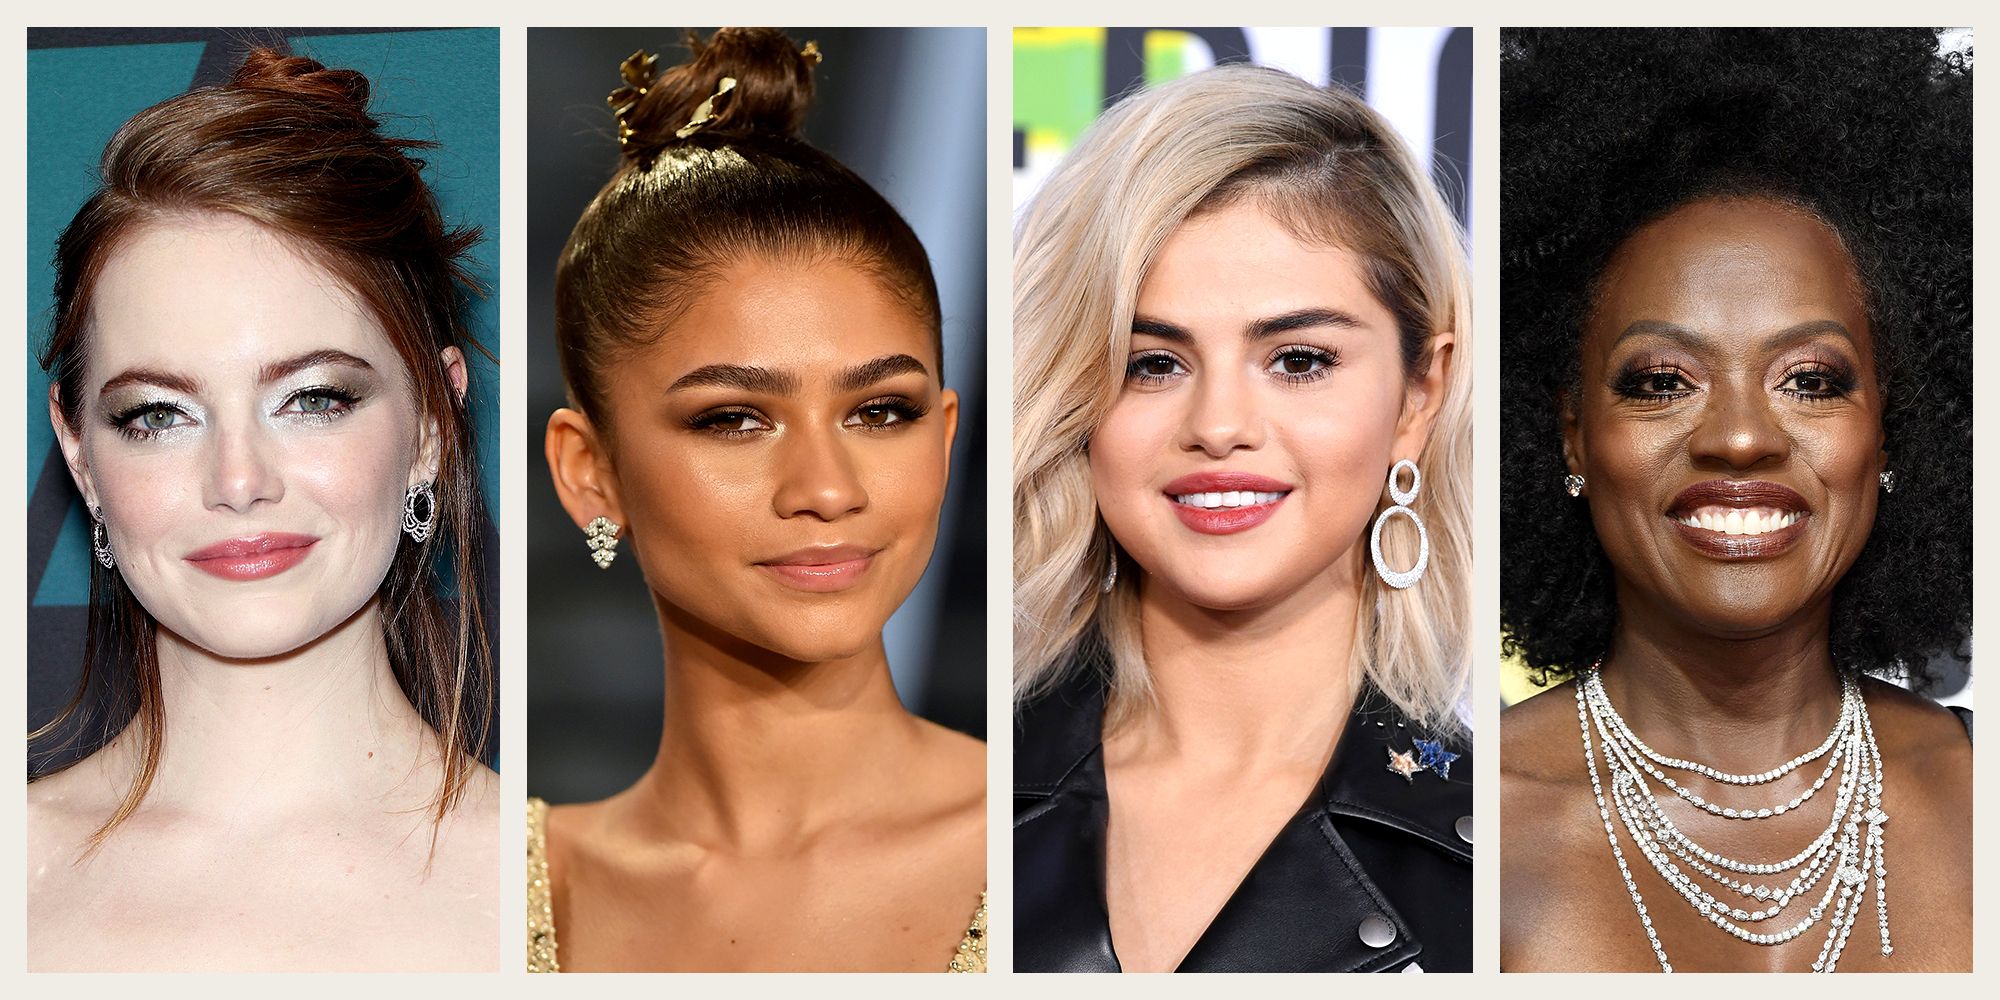 10 Best Celebrity Hairstyles For Round Faces